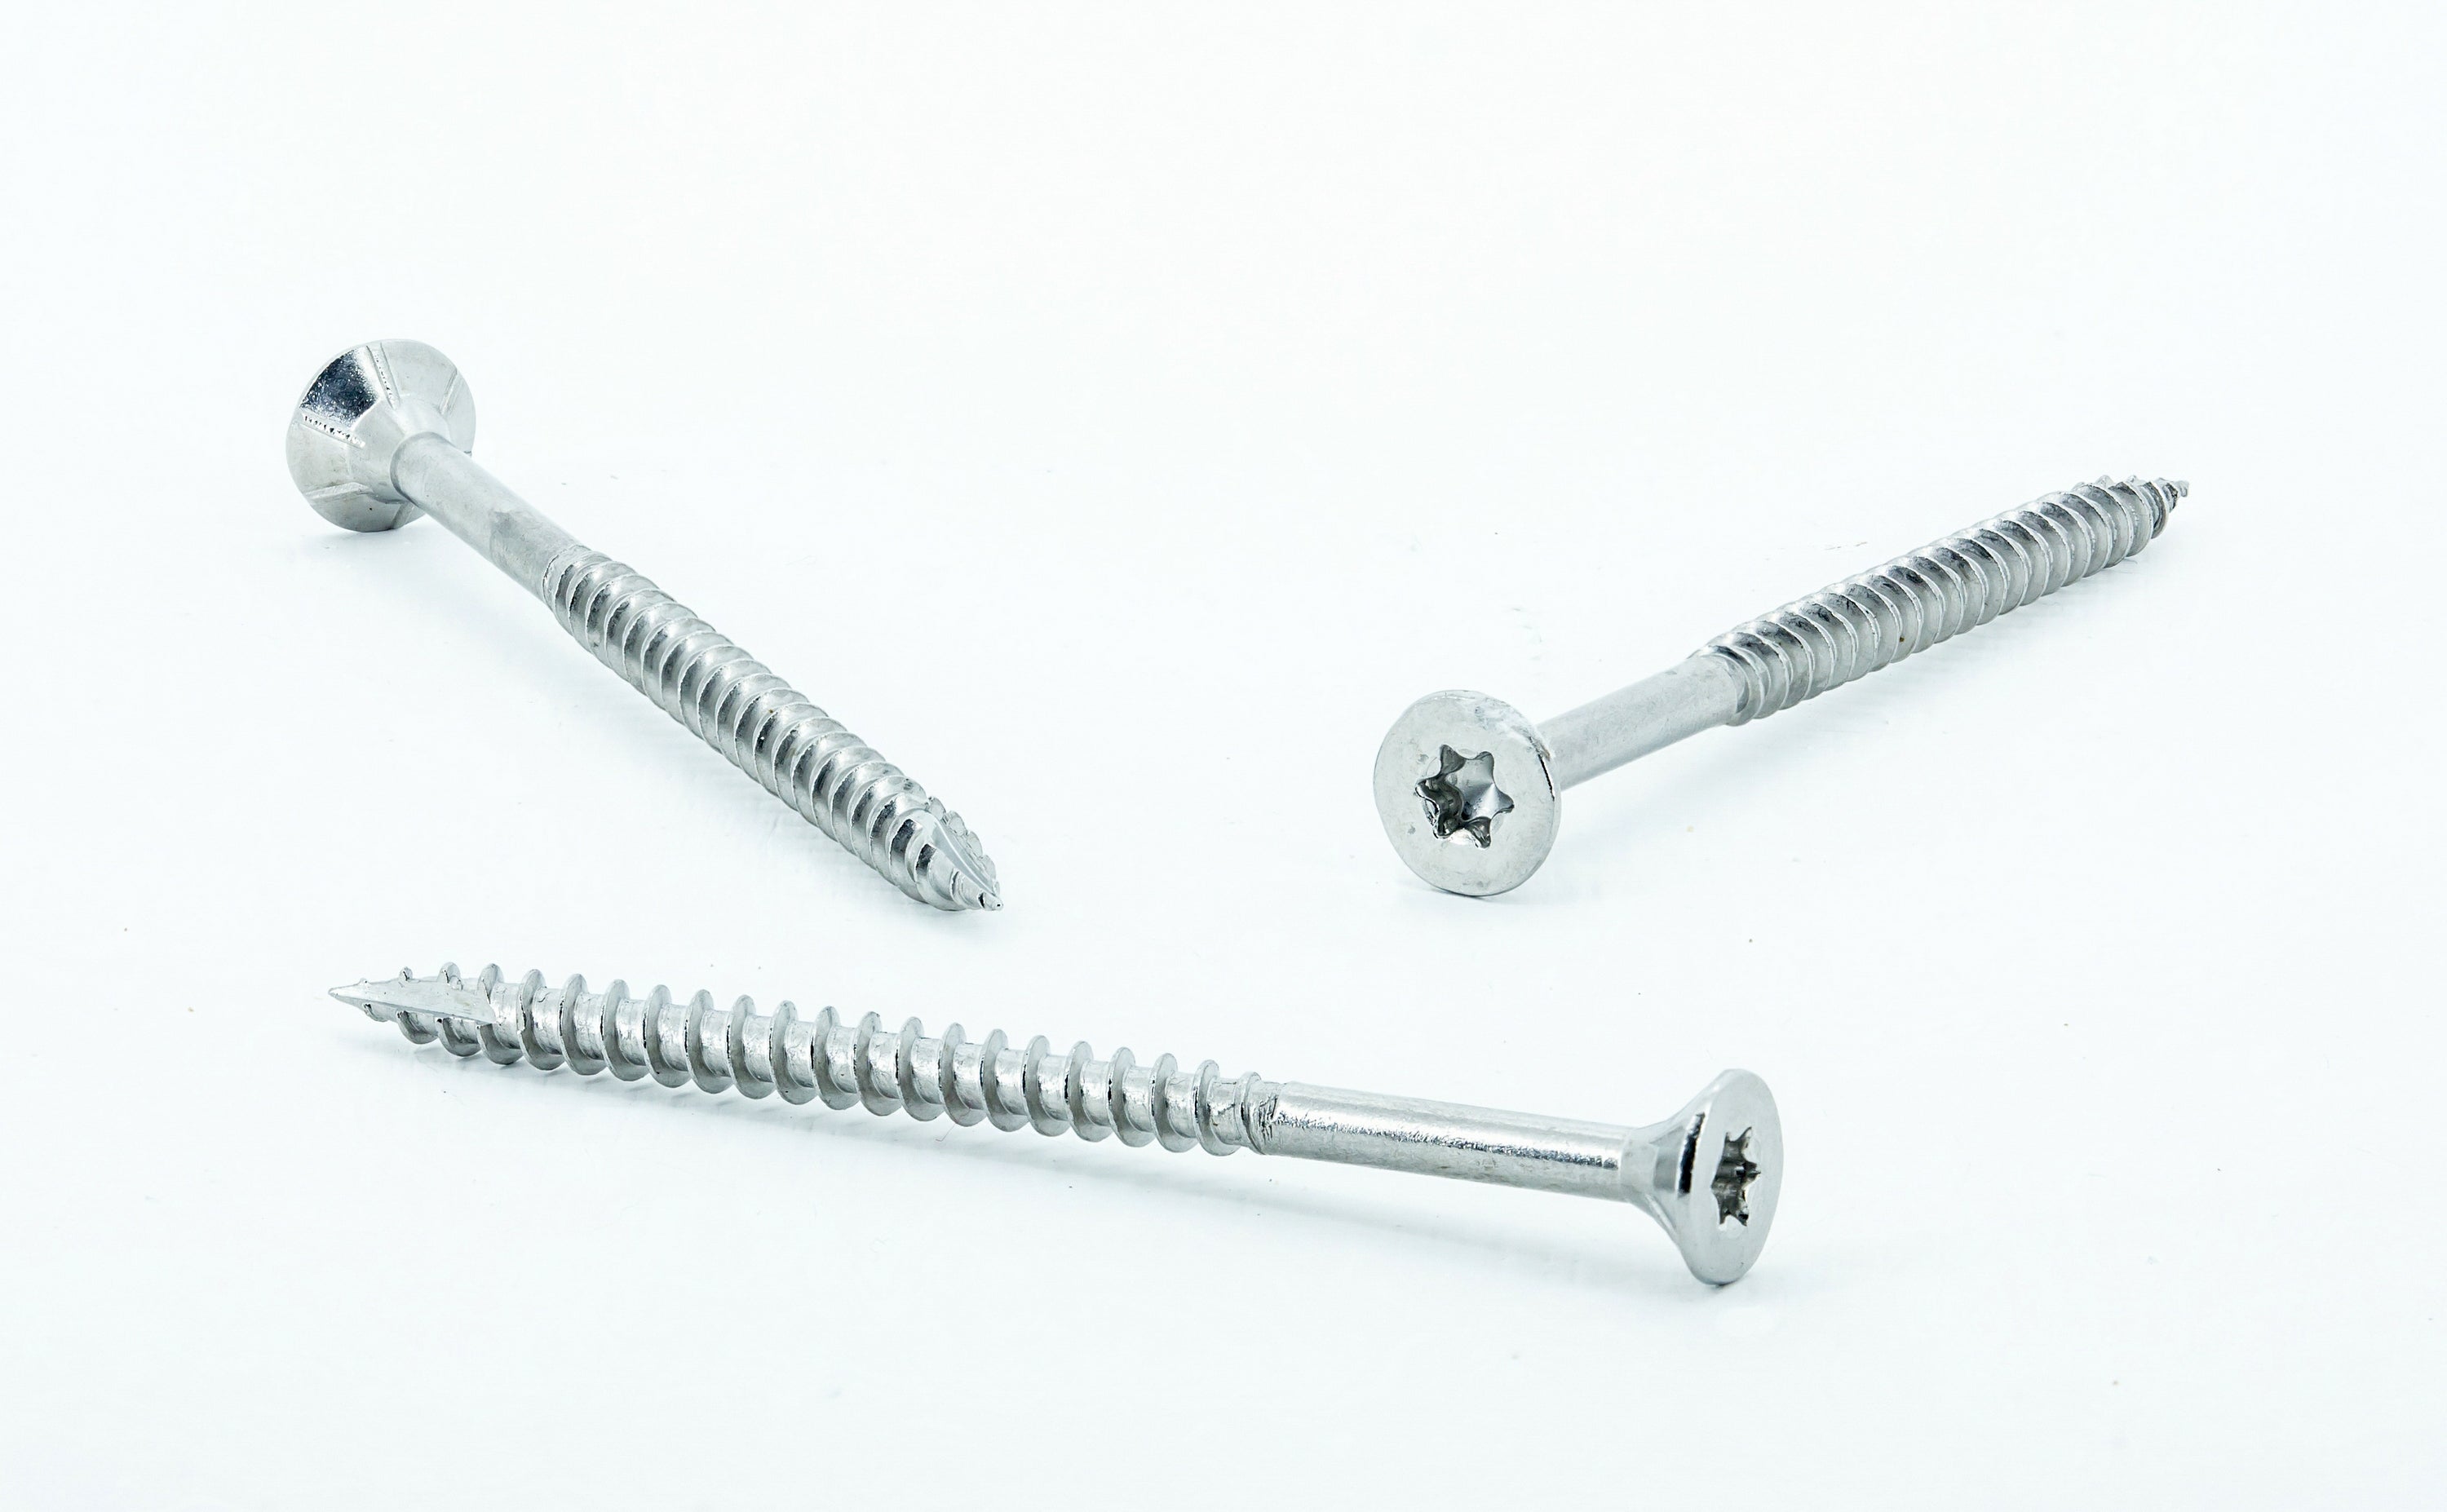 #10 × 3 inch stainless steel deck screws flat head torx drive by Allen's Trading Co. Eagle Claw Fasteners